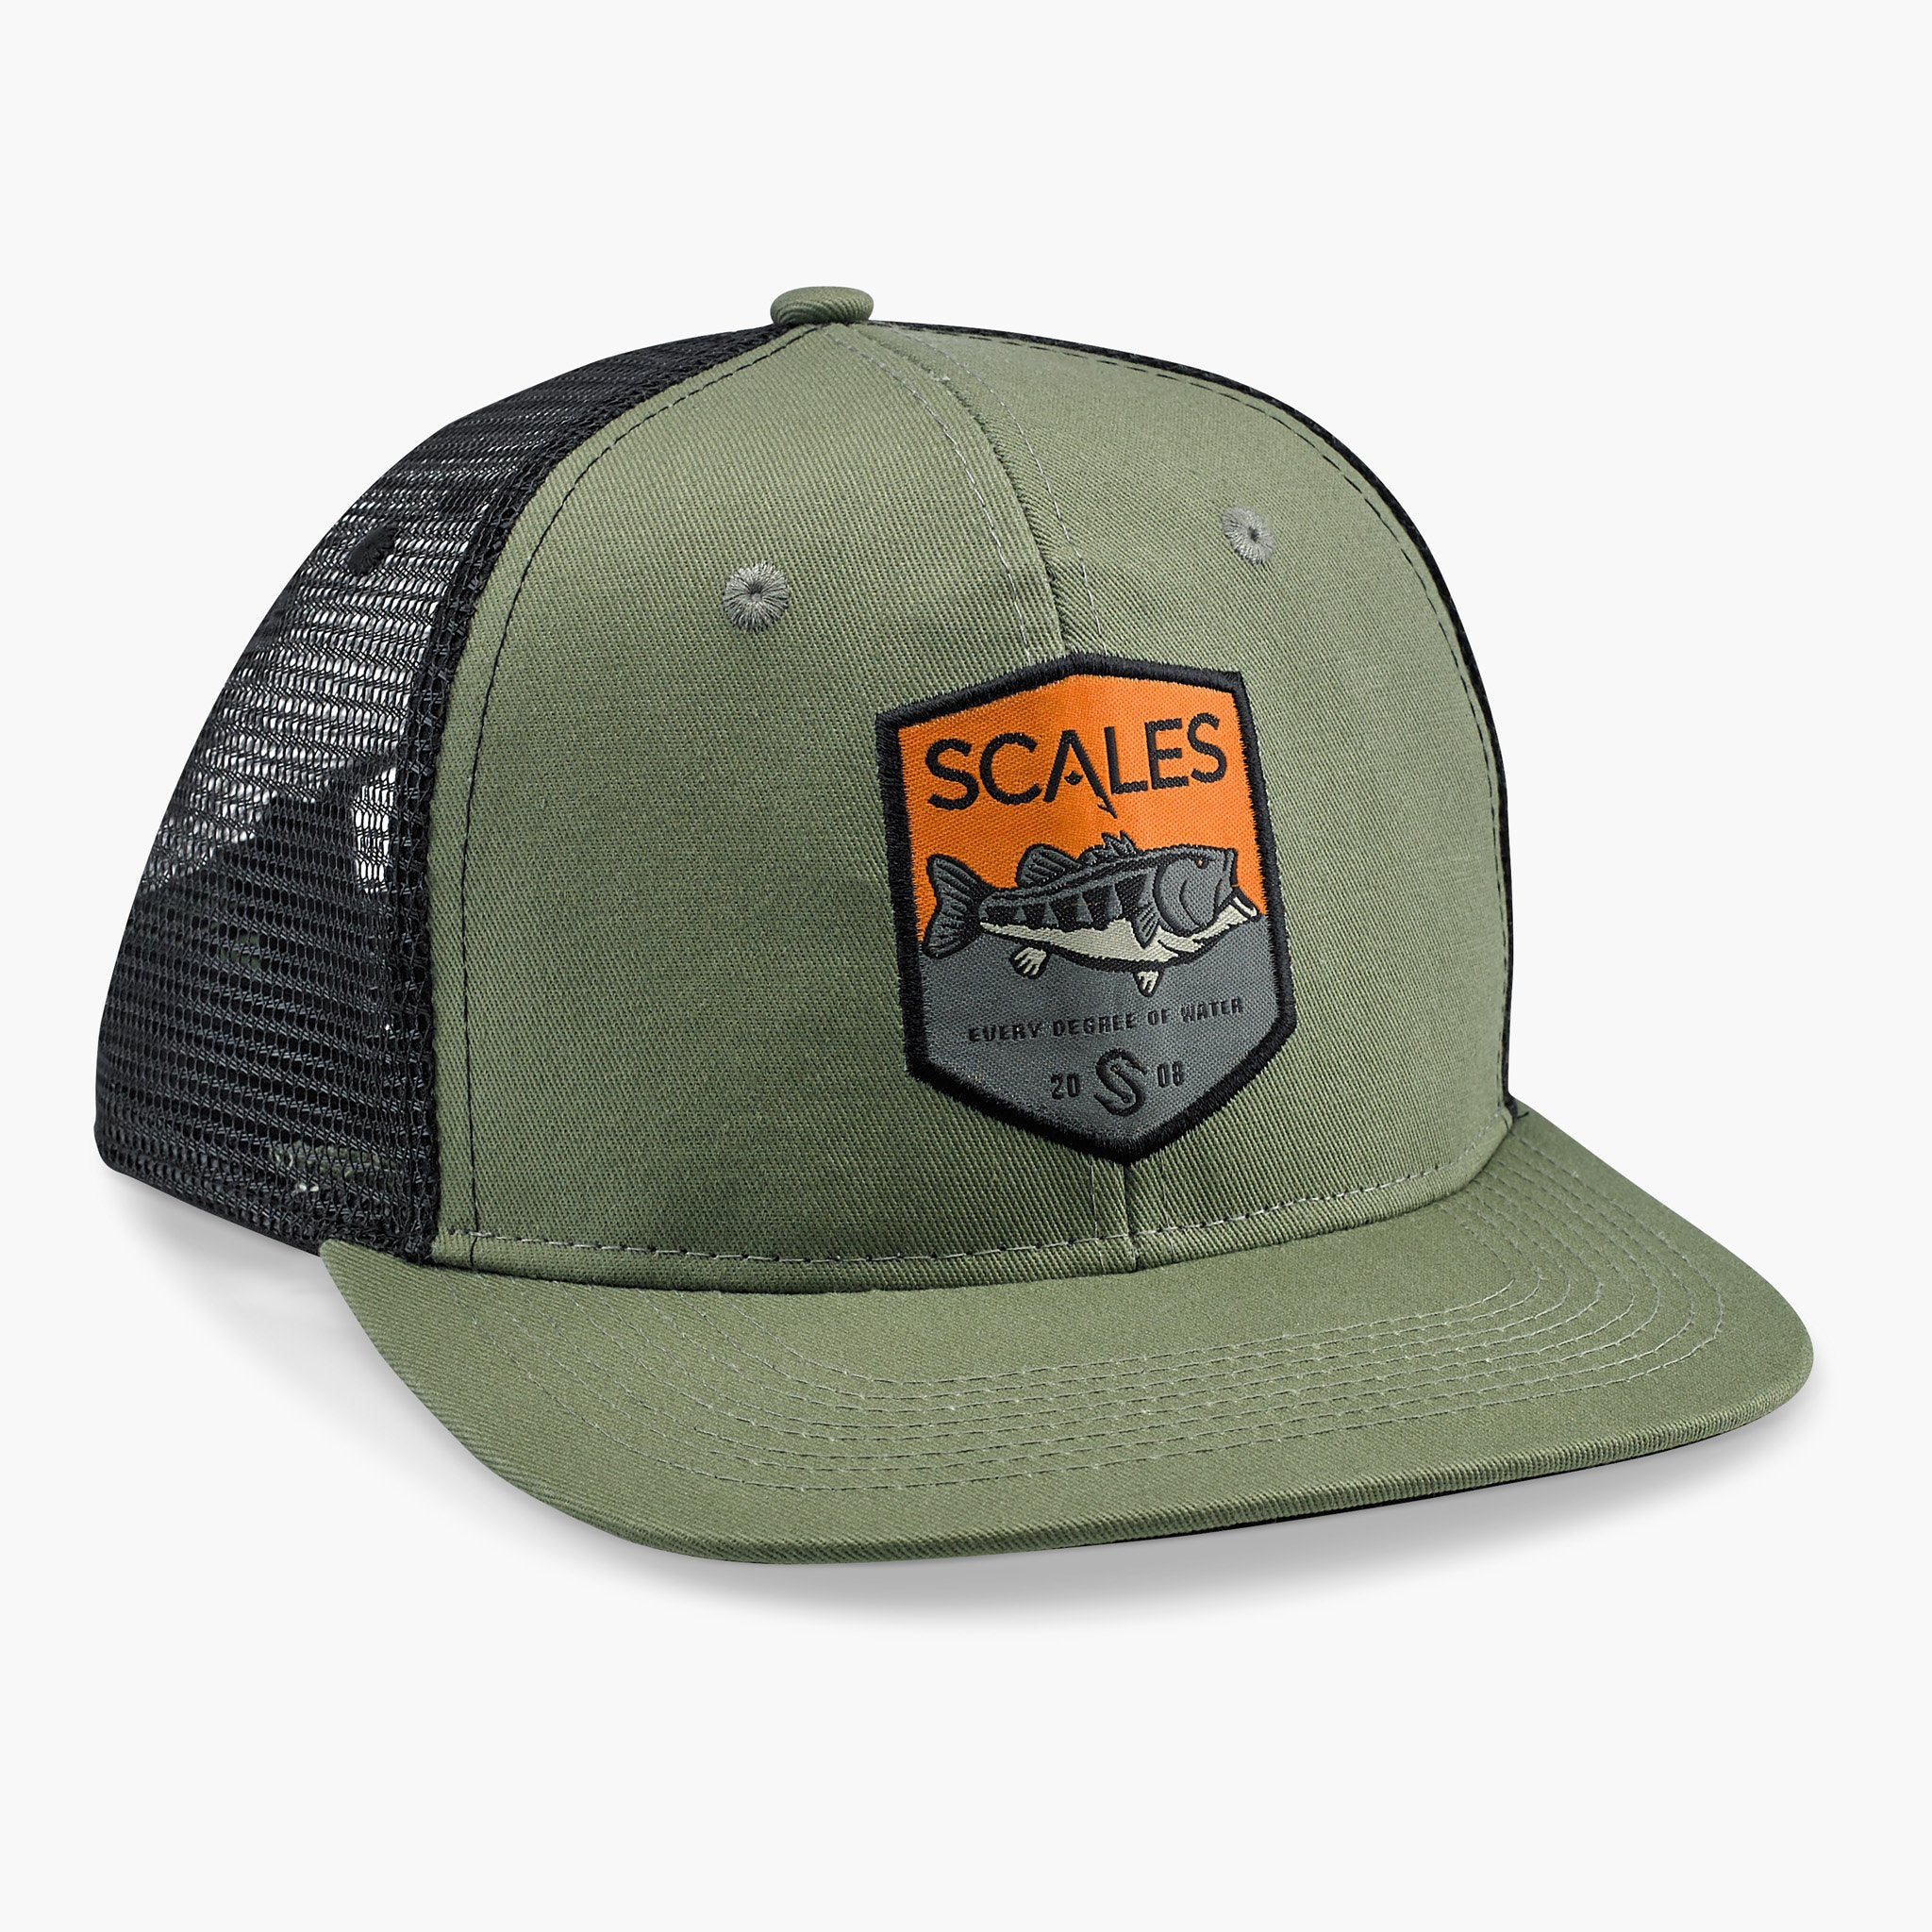 Scales Solid Fish Trucker Hat - Green/Black, Size: One Size